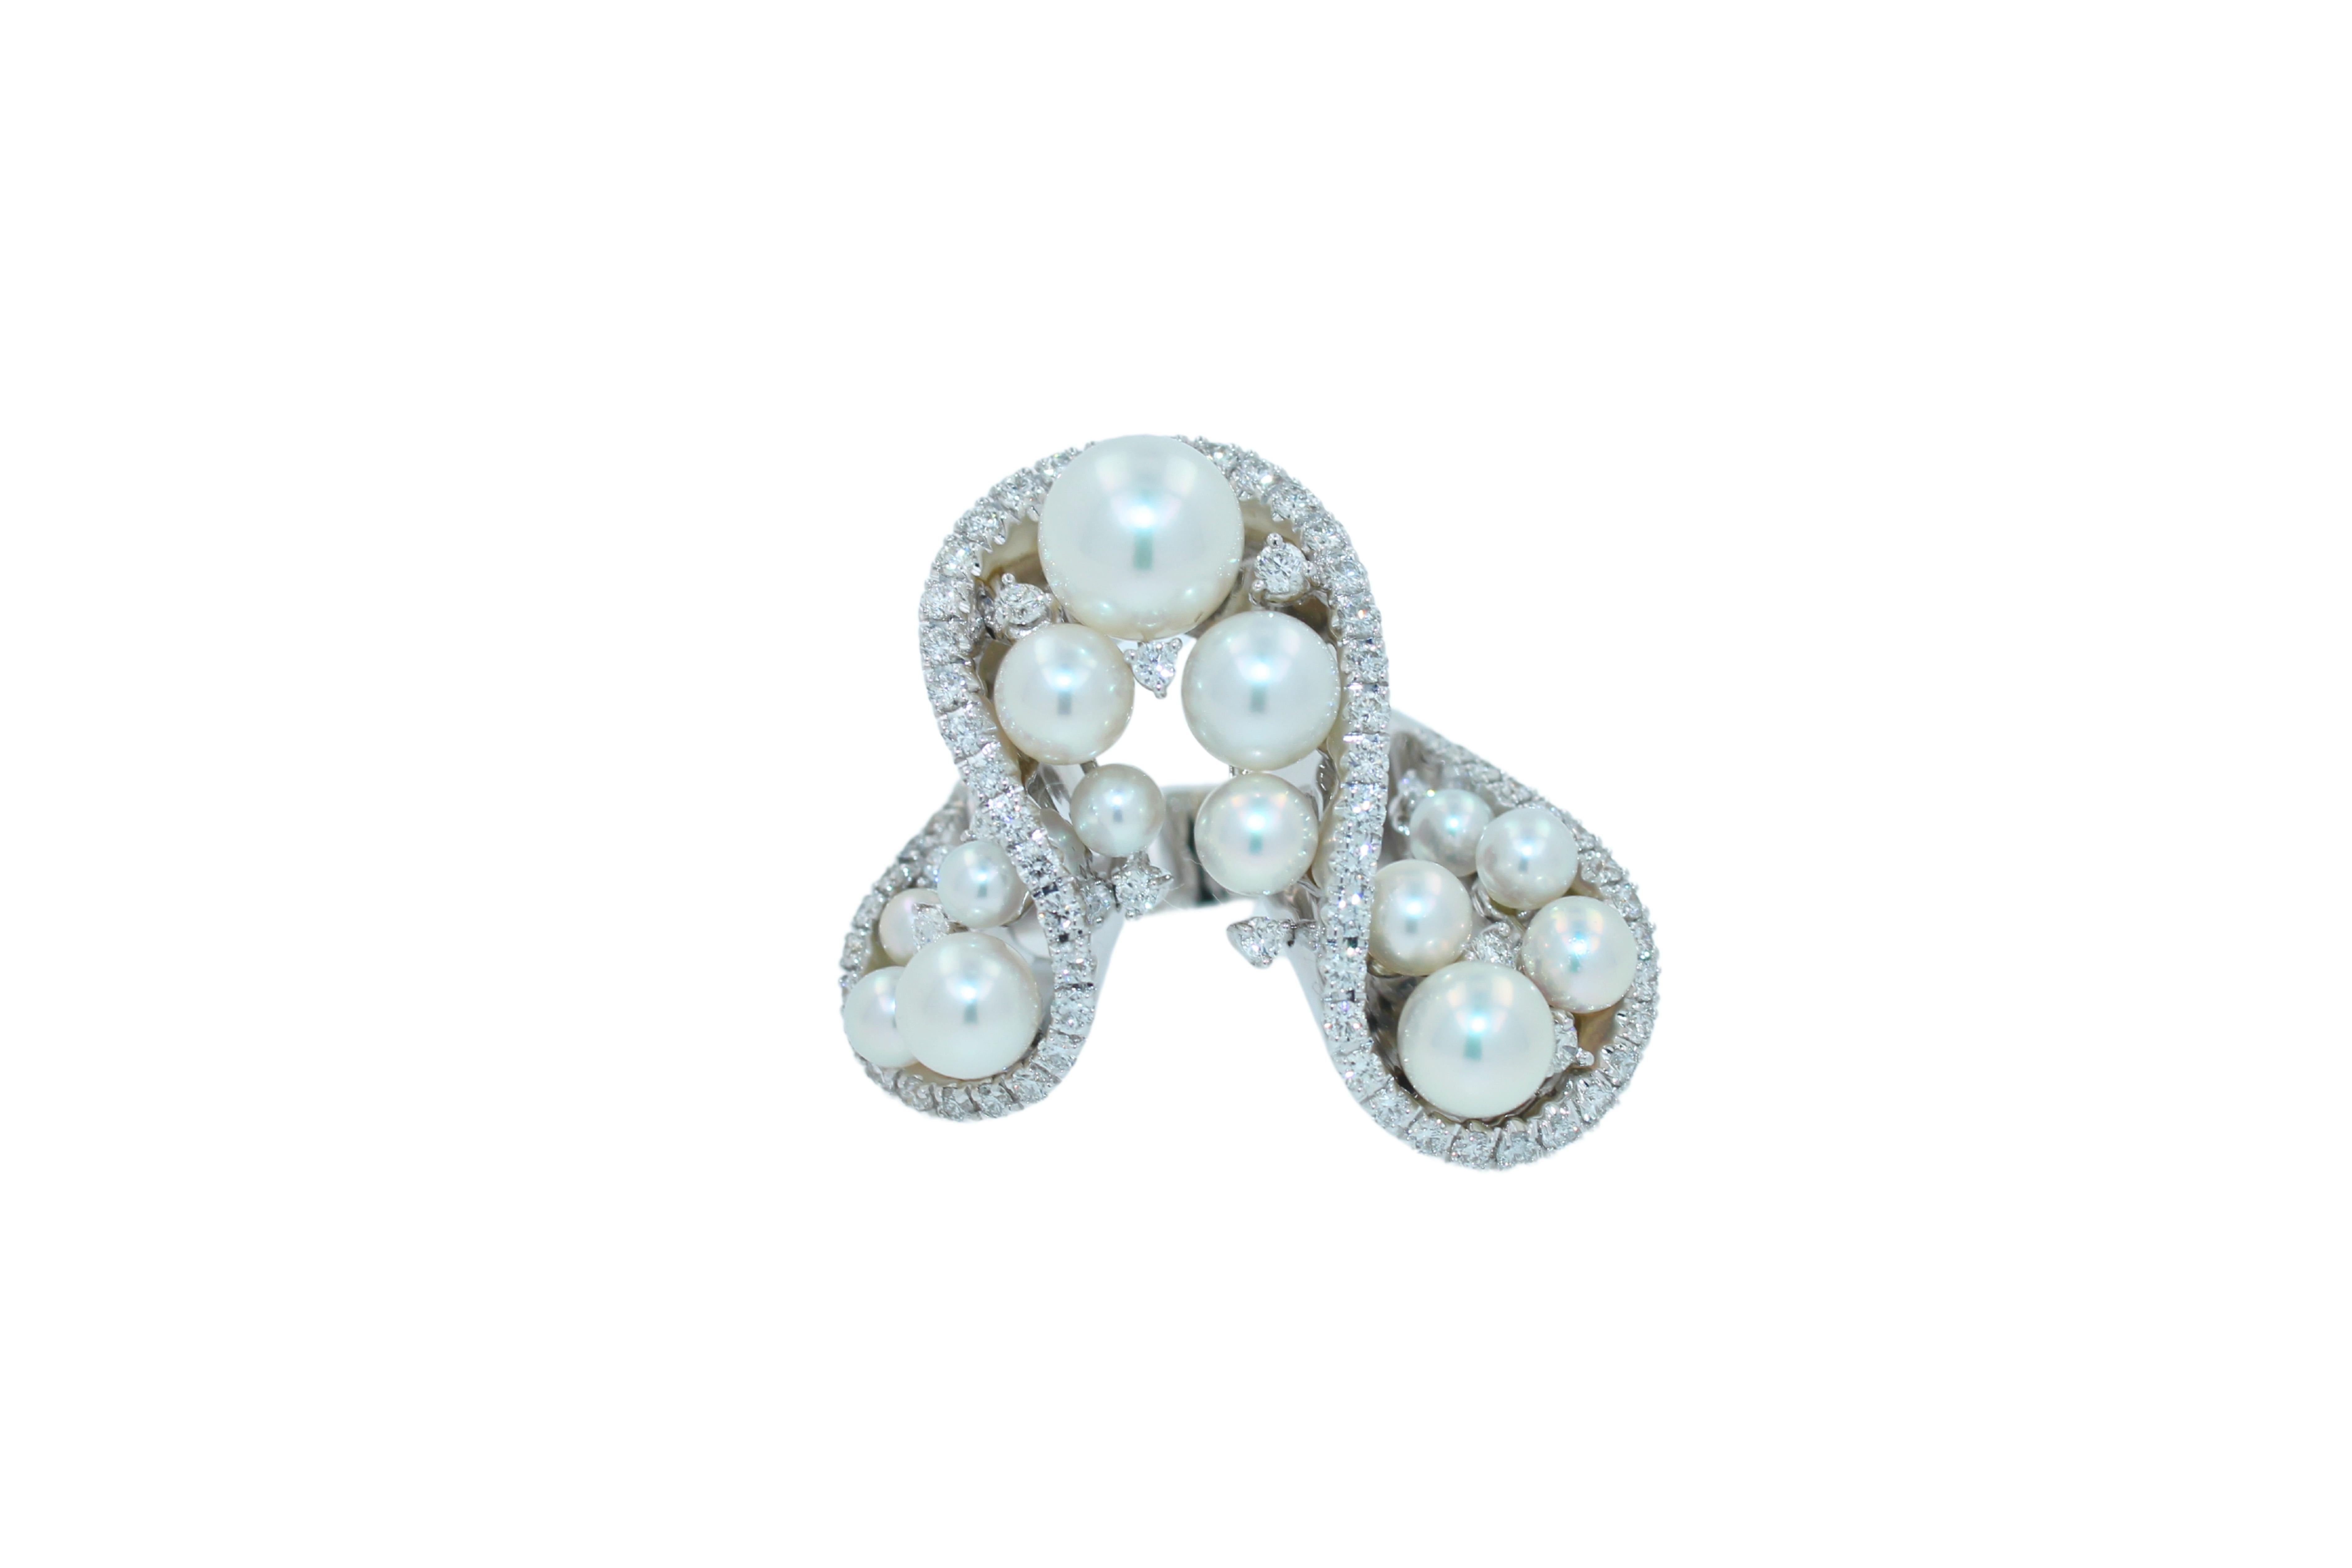 Akoya Pearl & Diamond Grape Twist Ring

Akoya White Pearl Grape Luxury Cocktail Pave Elegant 18K White Gold Diamond Ring

This collection of rich and tempting orbs comes to life with Akoya pearls bunched like sweet, luscious grapes thar wrap around